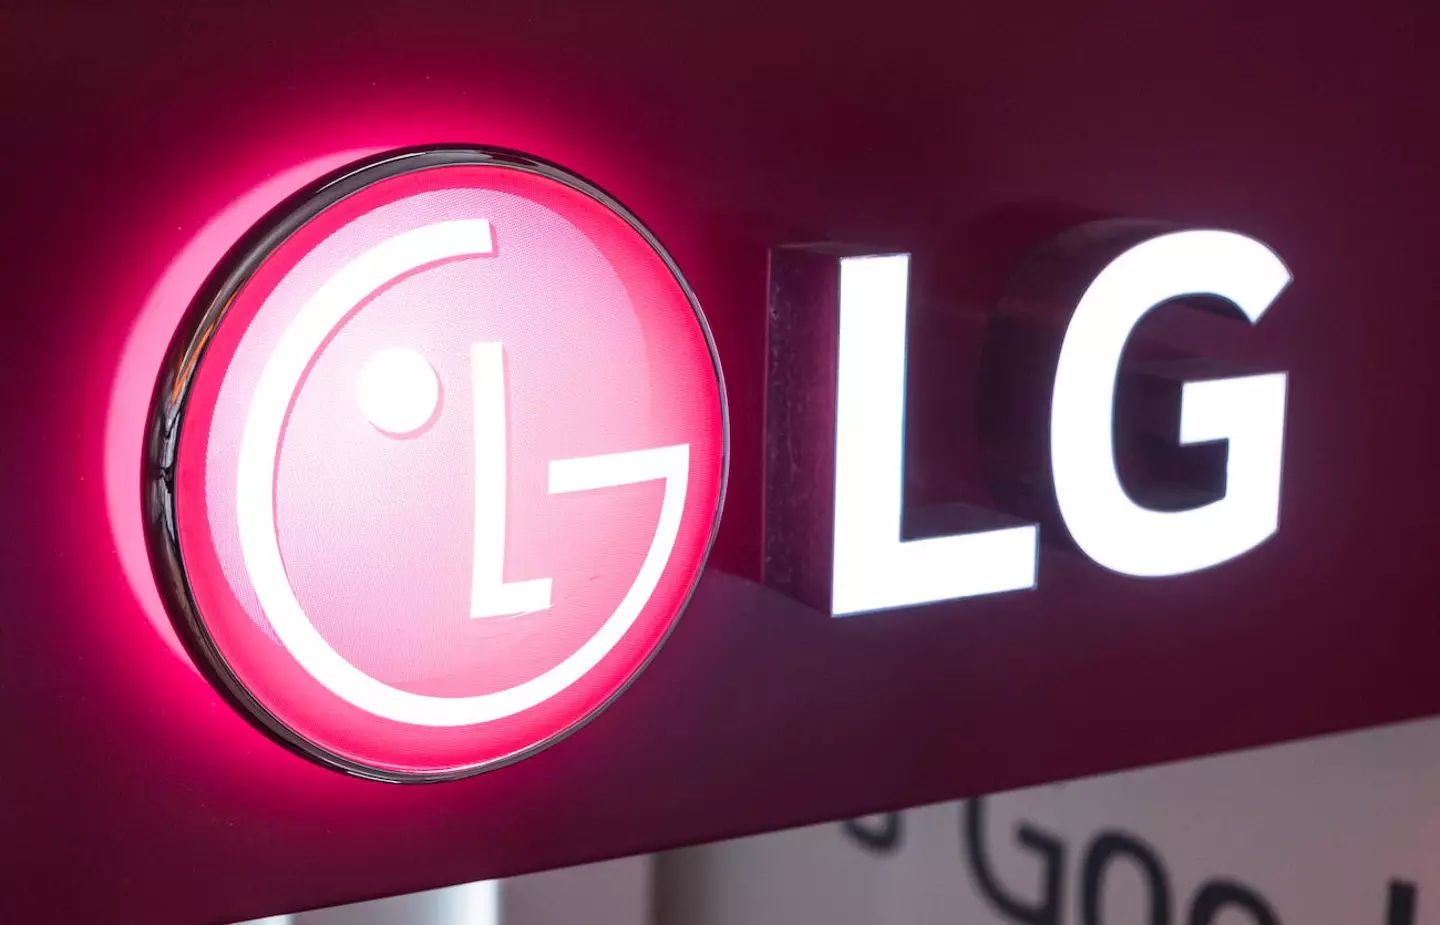 There's A Clever Hidden Meaning In The LG Logo